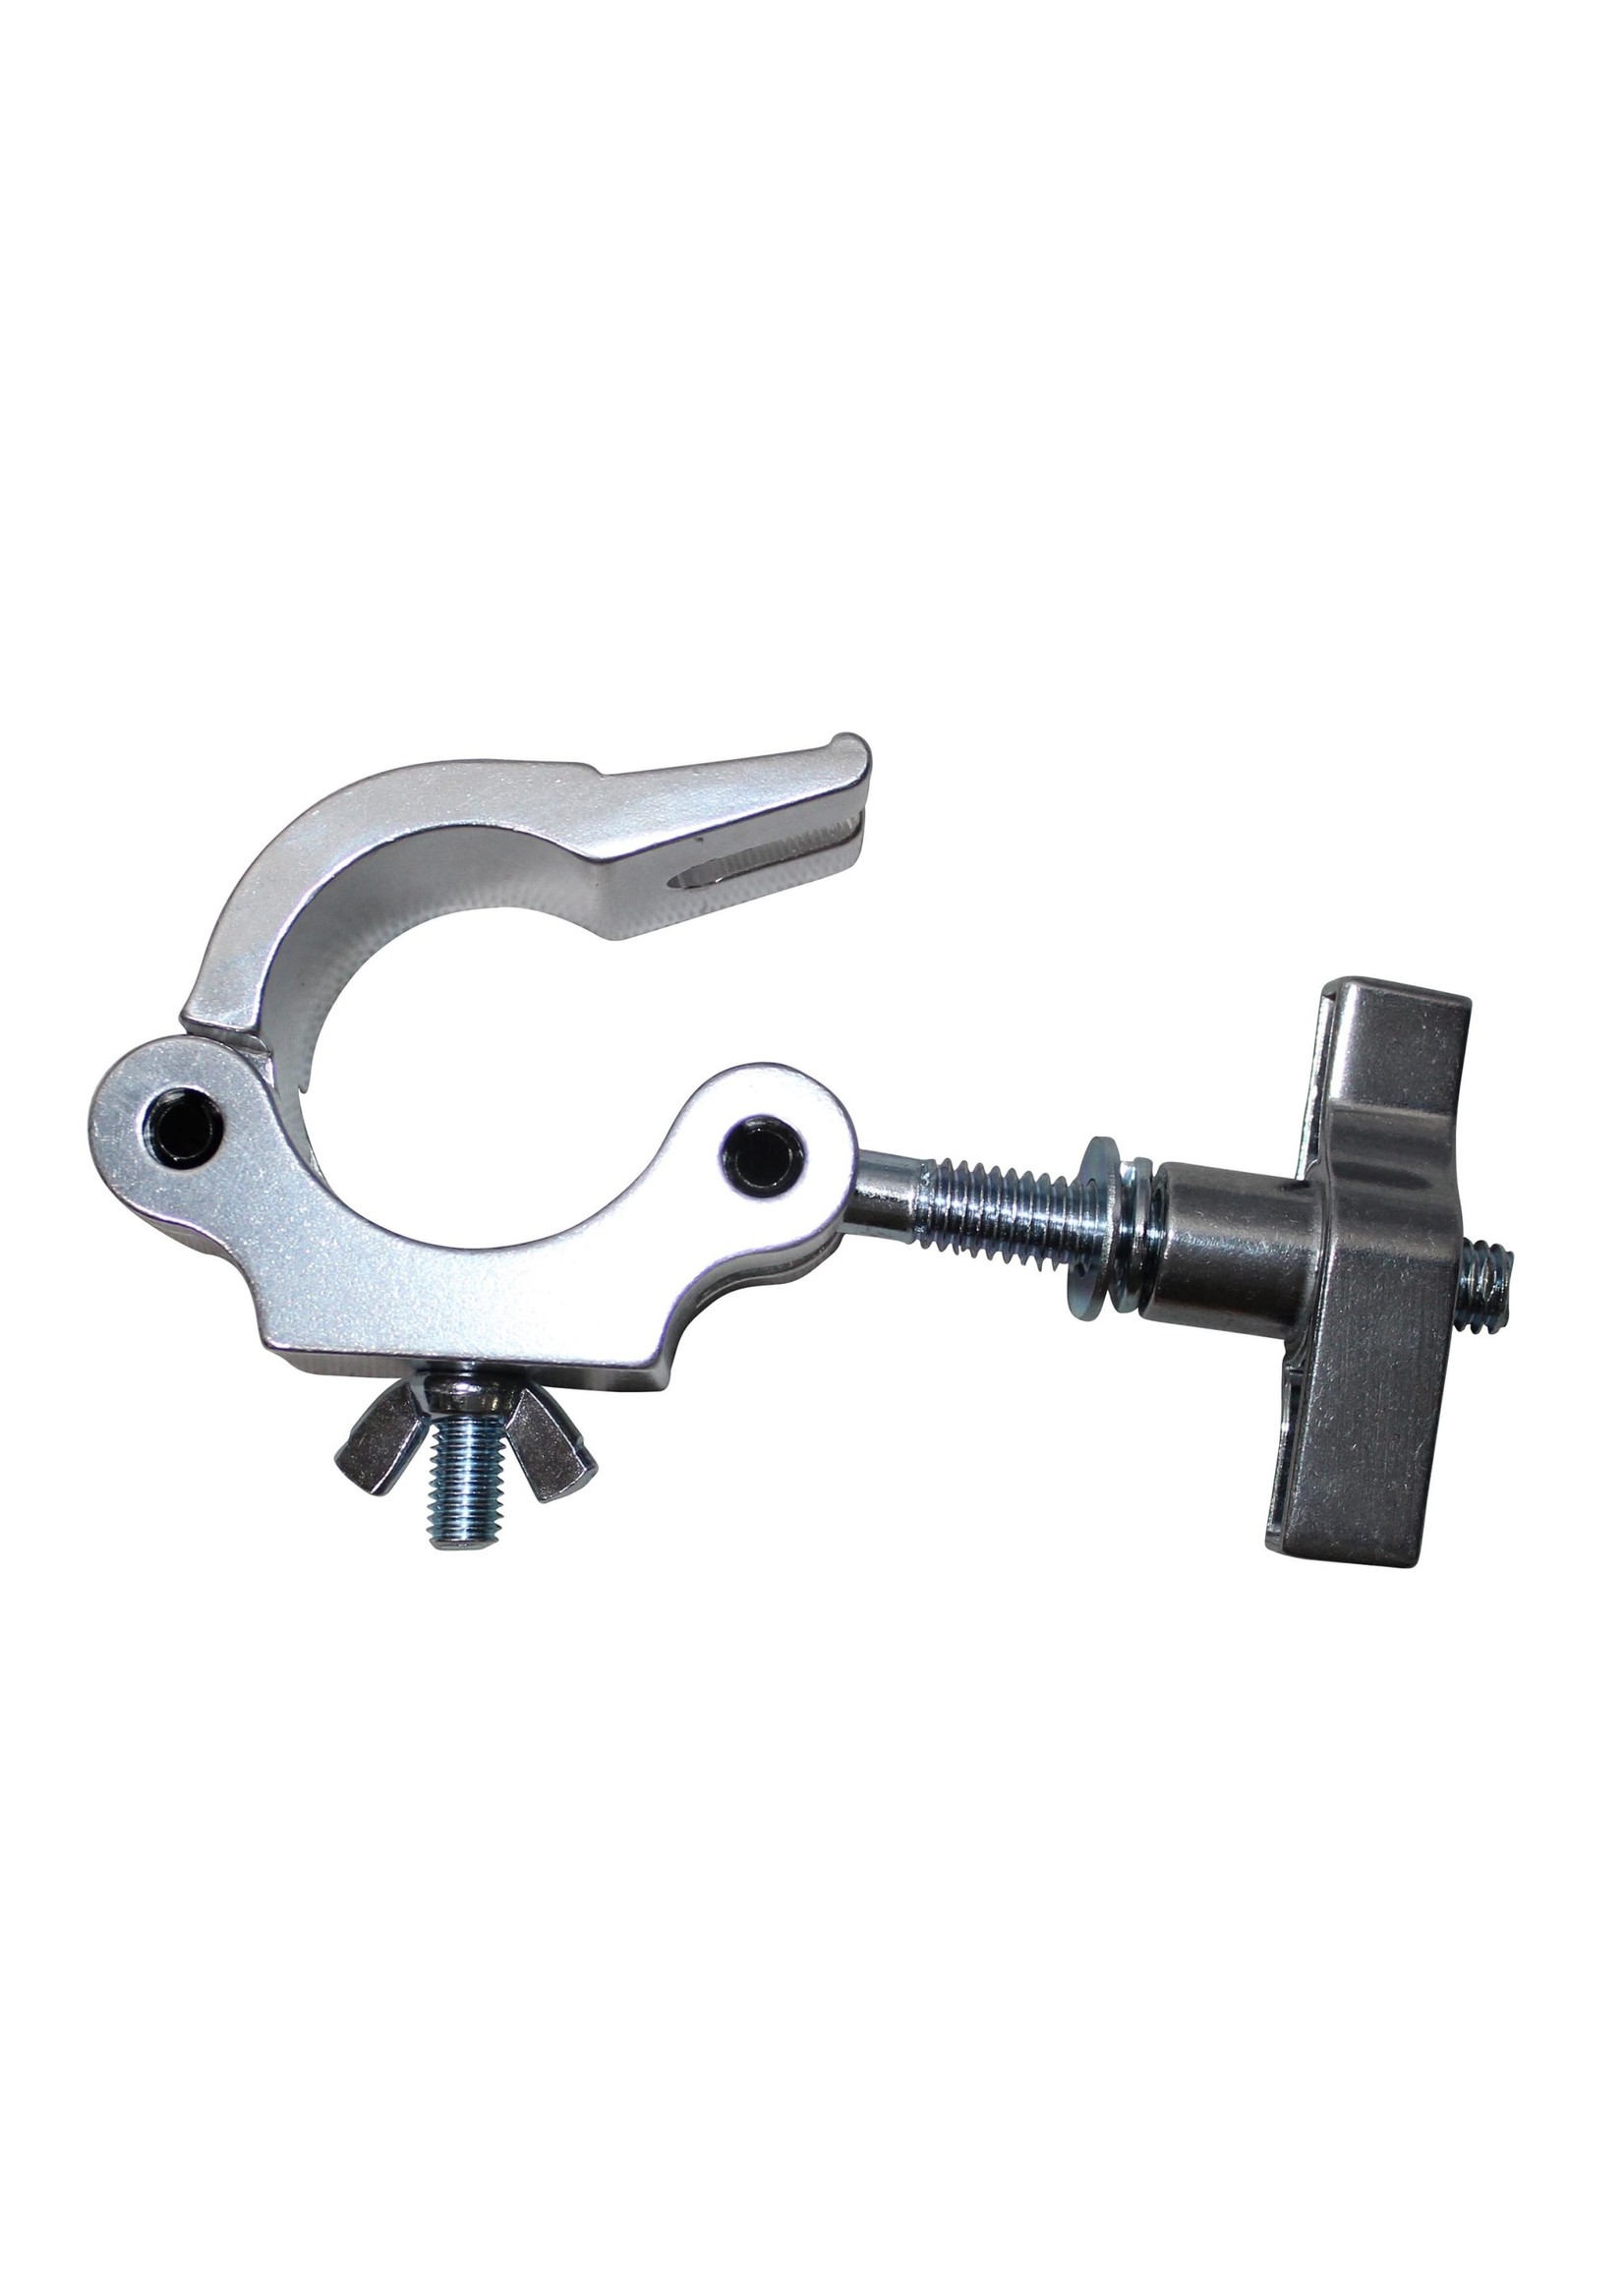 ProX ProX T-C4H 2" Pro Clamp  For 2" Truss 1100 Lbs Capacity